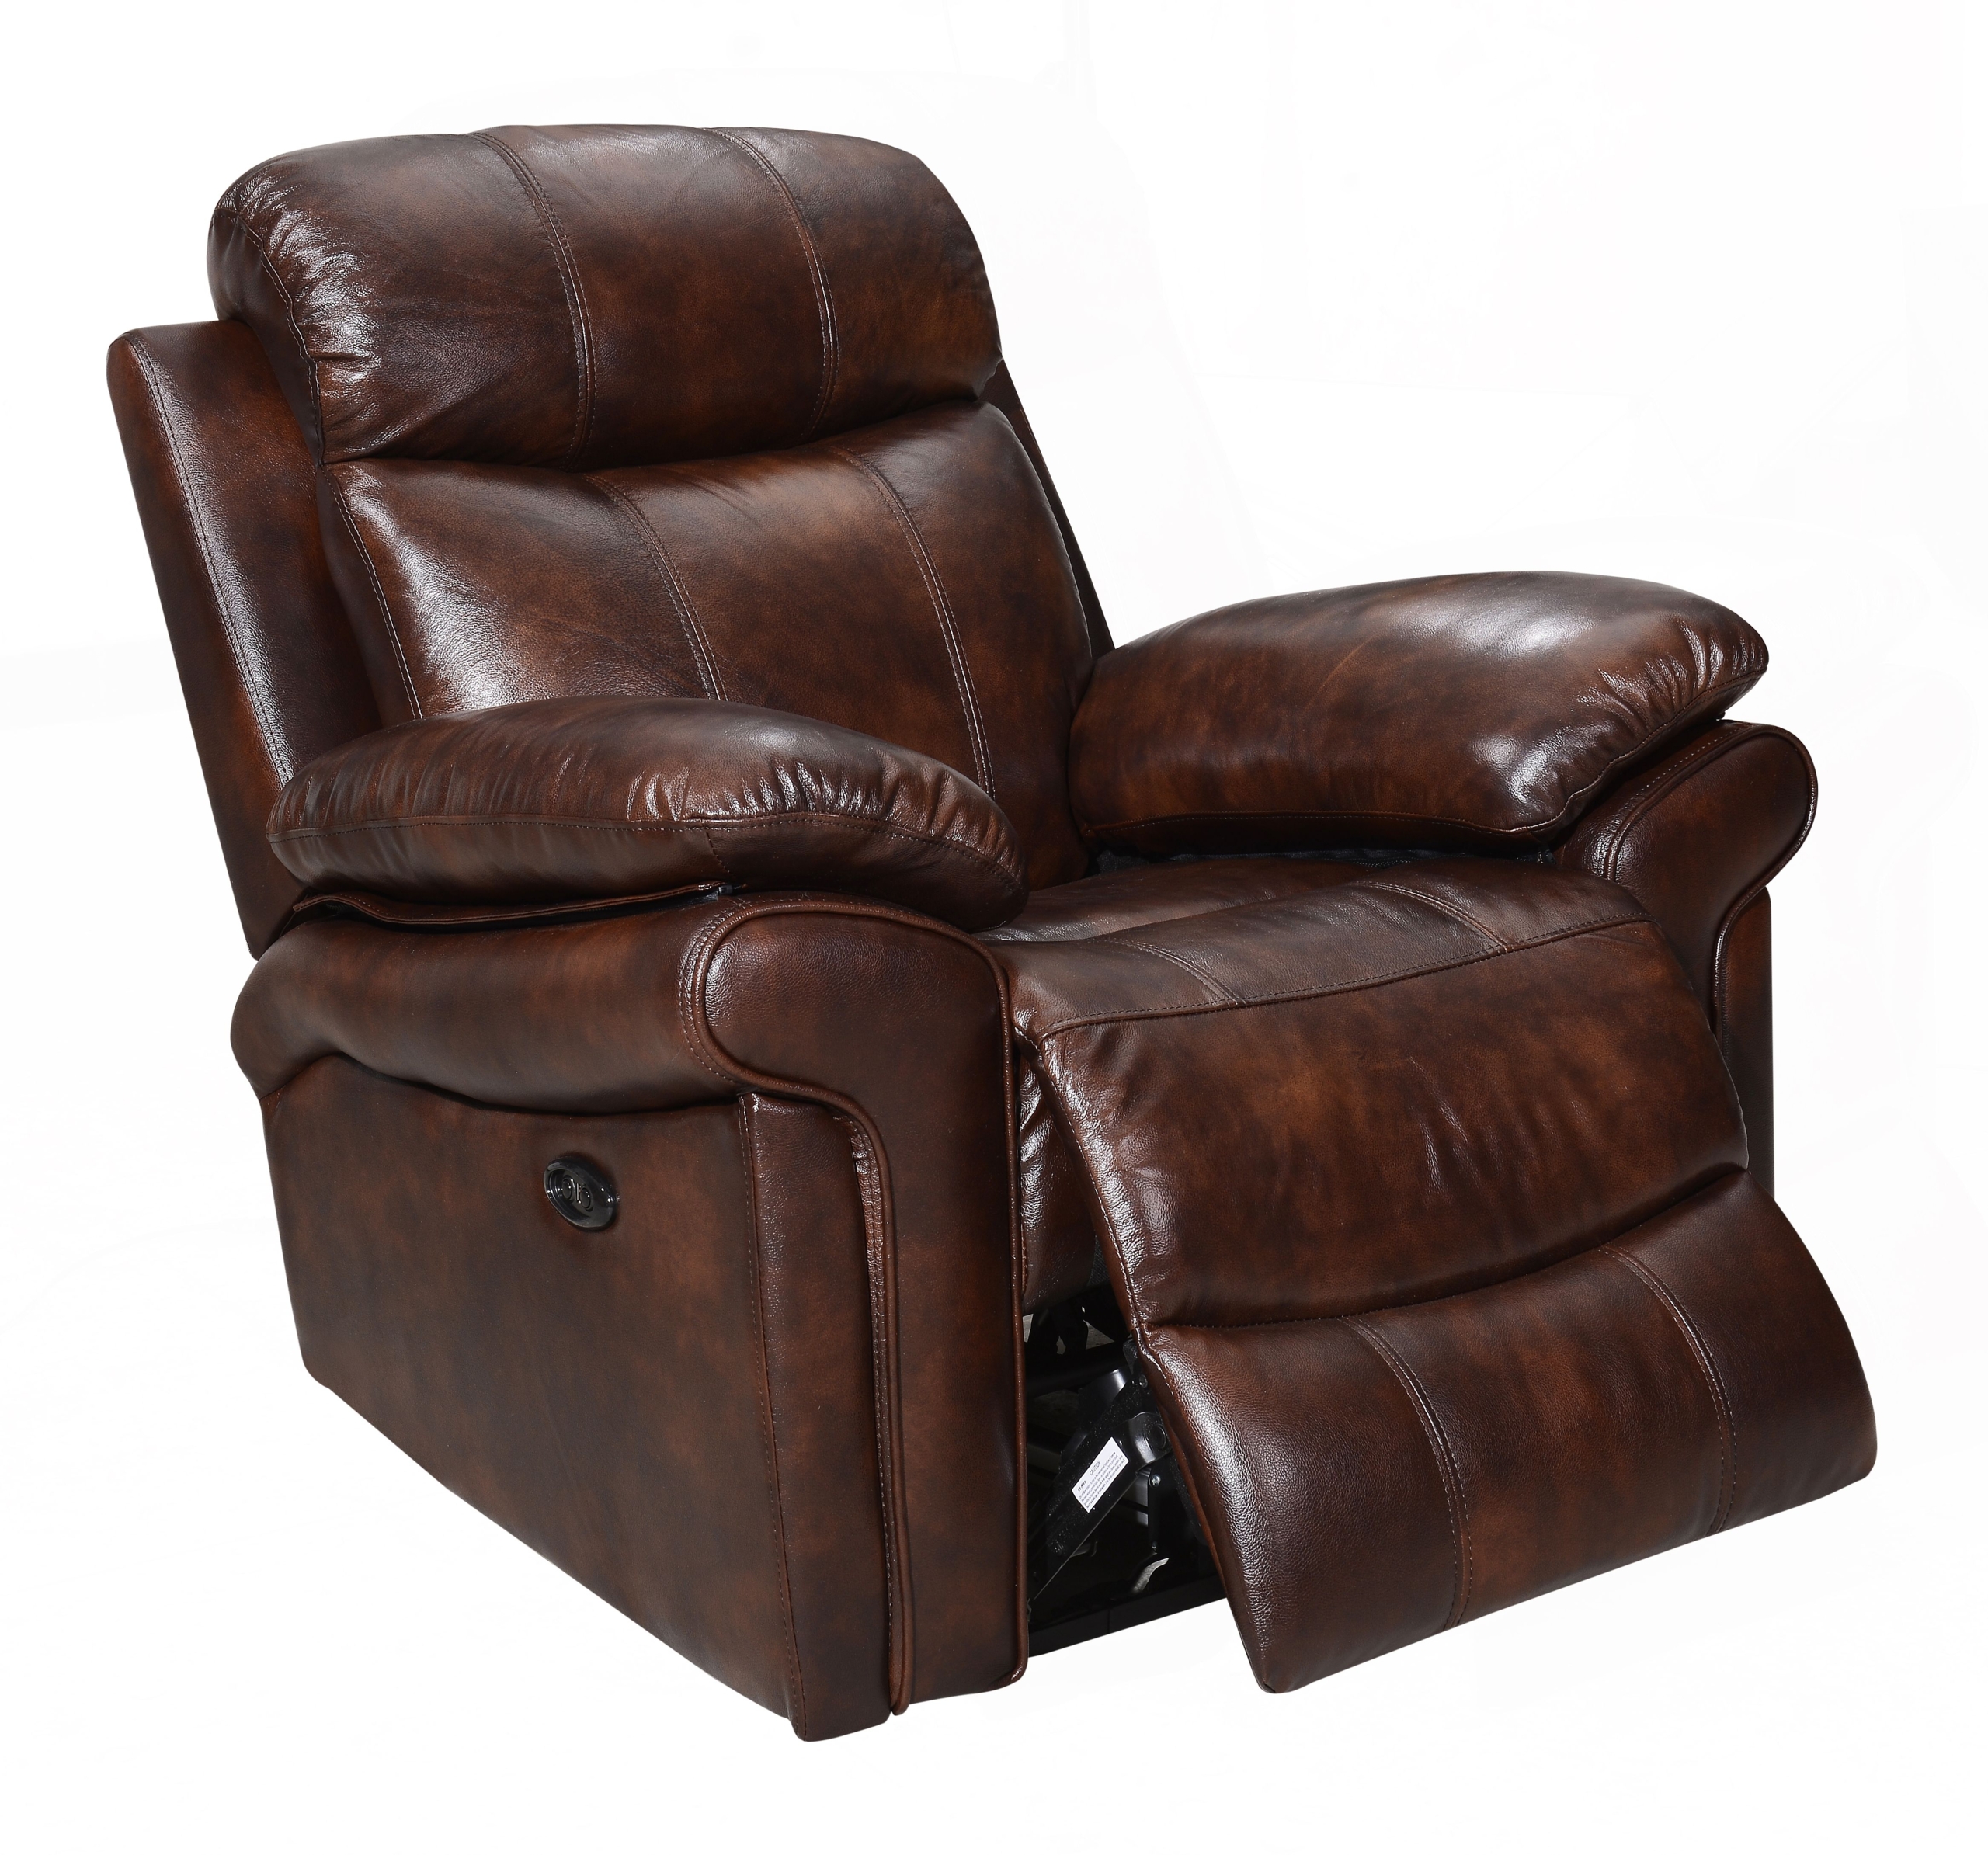 Top Grain Leather Recliner Visualhunt, Traditional Leather Recliner